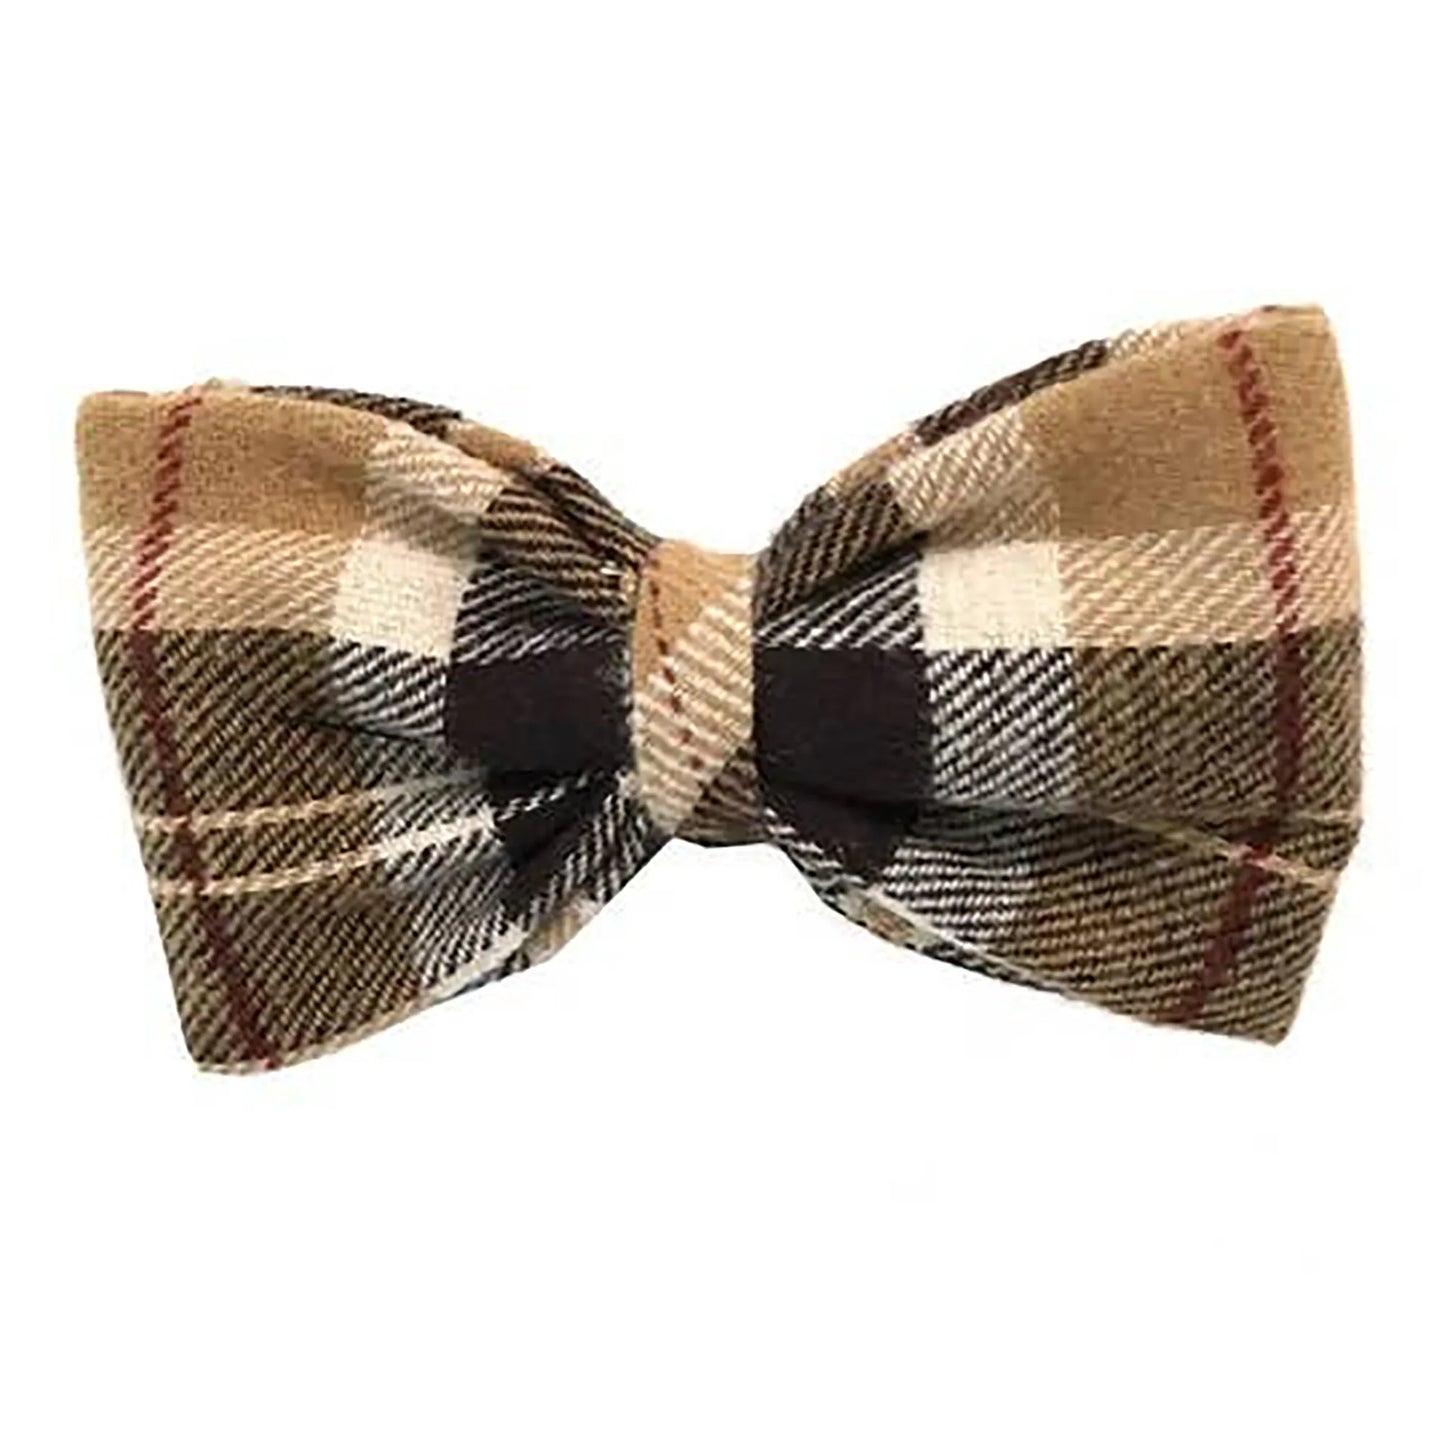 Cotton Flannel Dog Bow Tie in Fall Colors